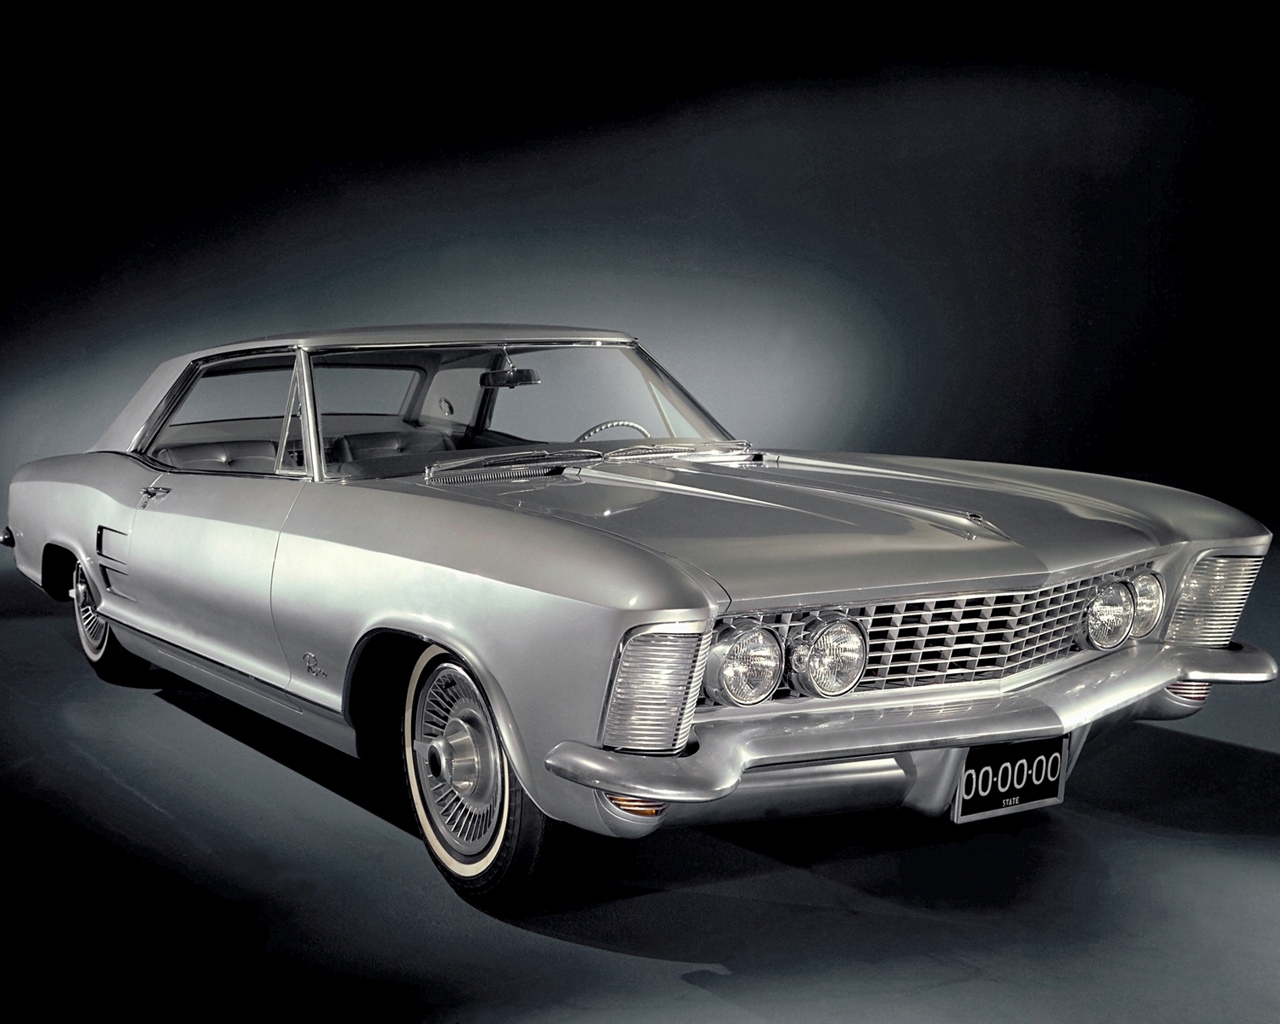 All Wallpapers | Wallpapers 2012: American Classic Cars ...